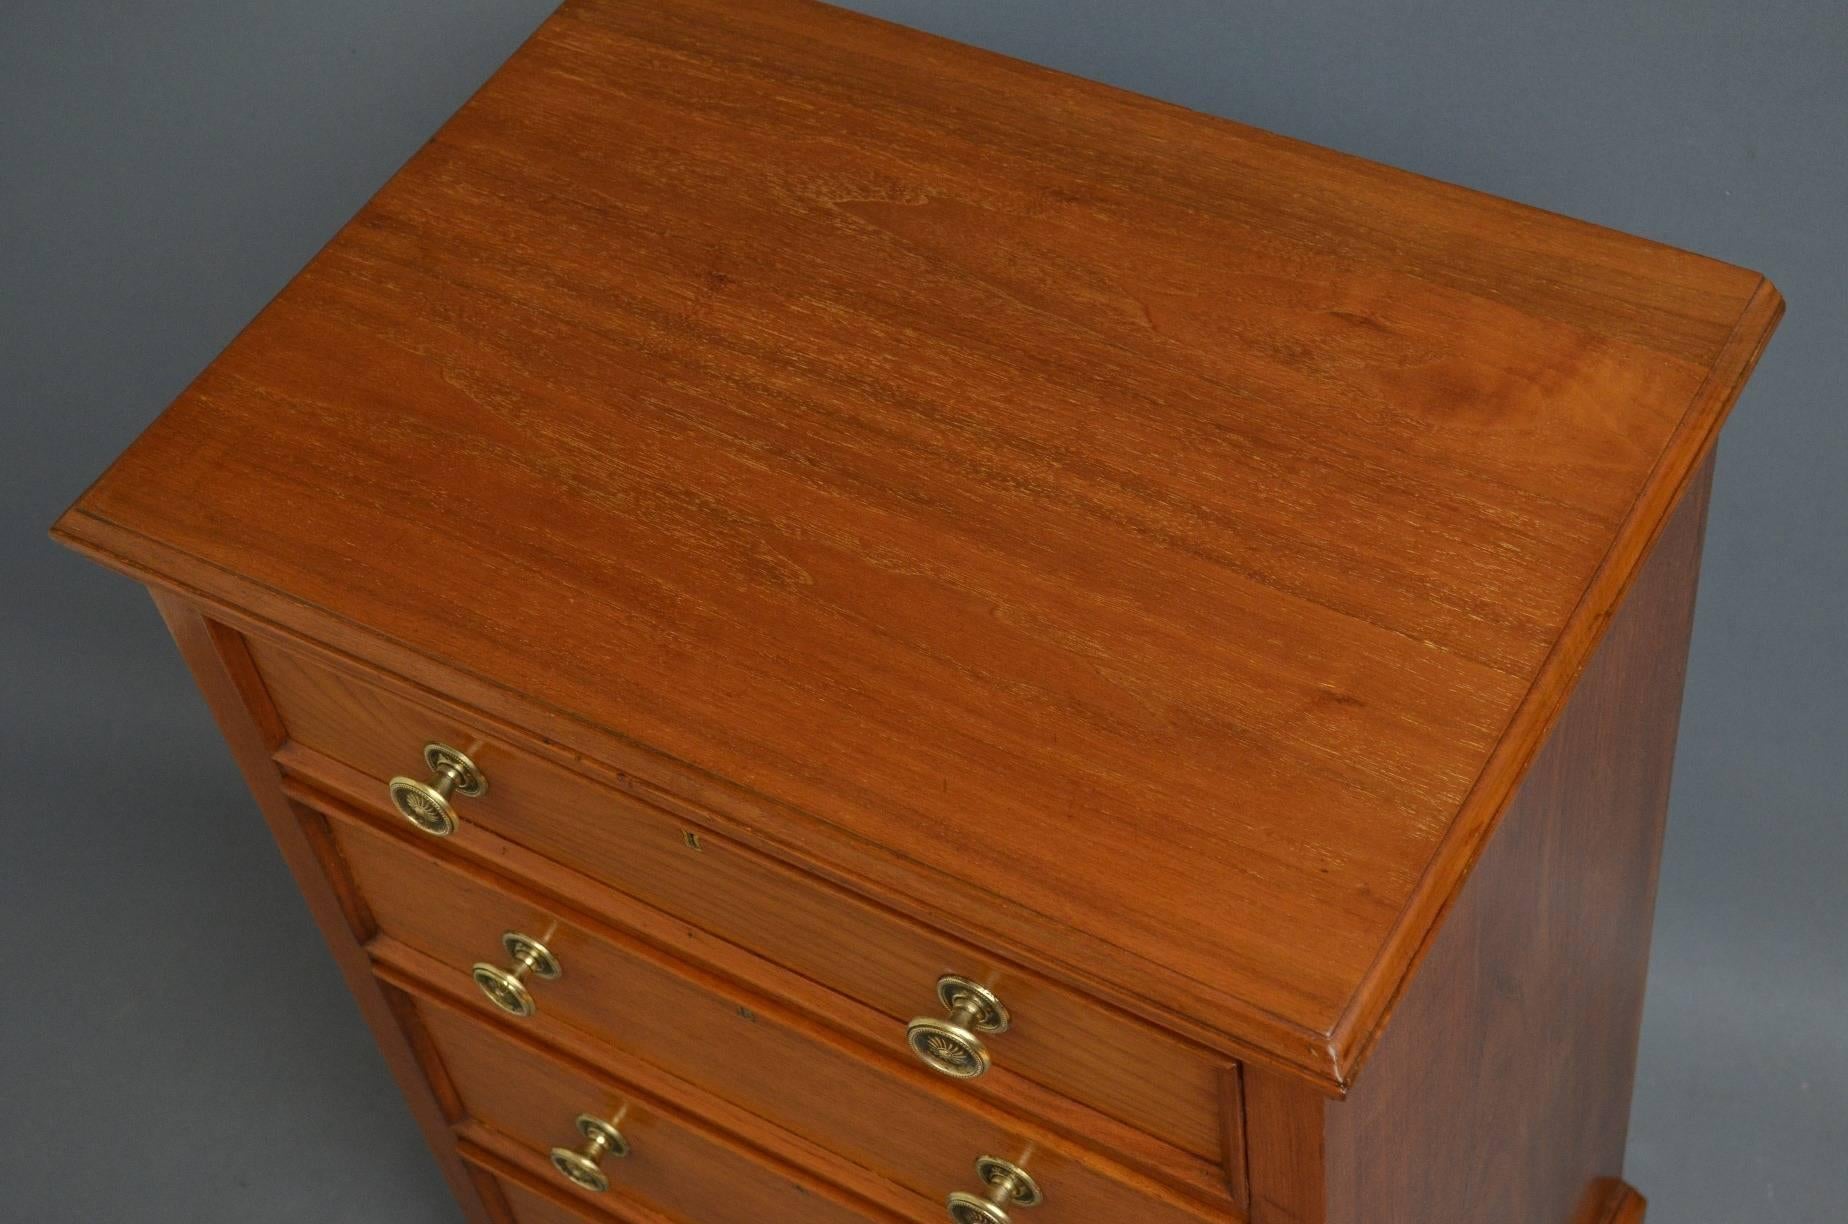 Sn3334, small Victorian, walnut chest of drawers by James Shoolbred, having figured walnut, moulded top above four graduated and moulded drawers, all fitted with original brass knobs, standing on plinth base, all in wonderful condition throughout